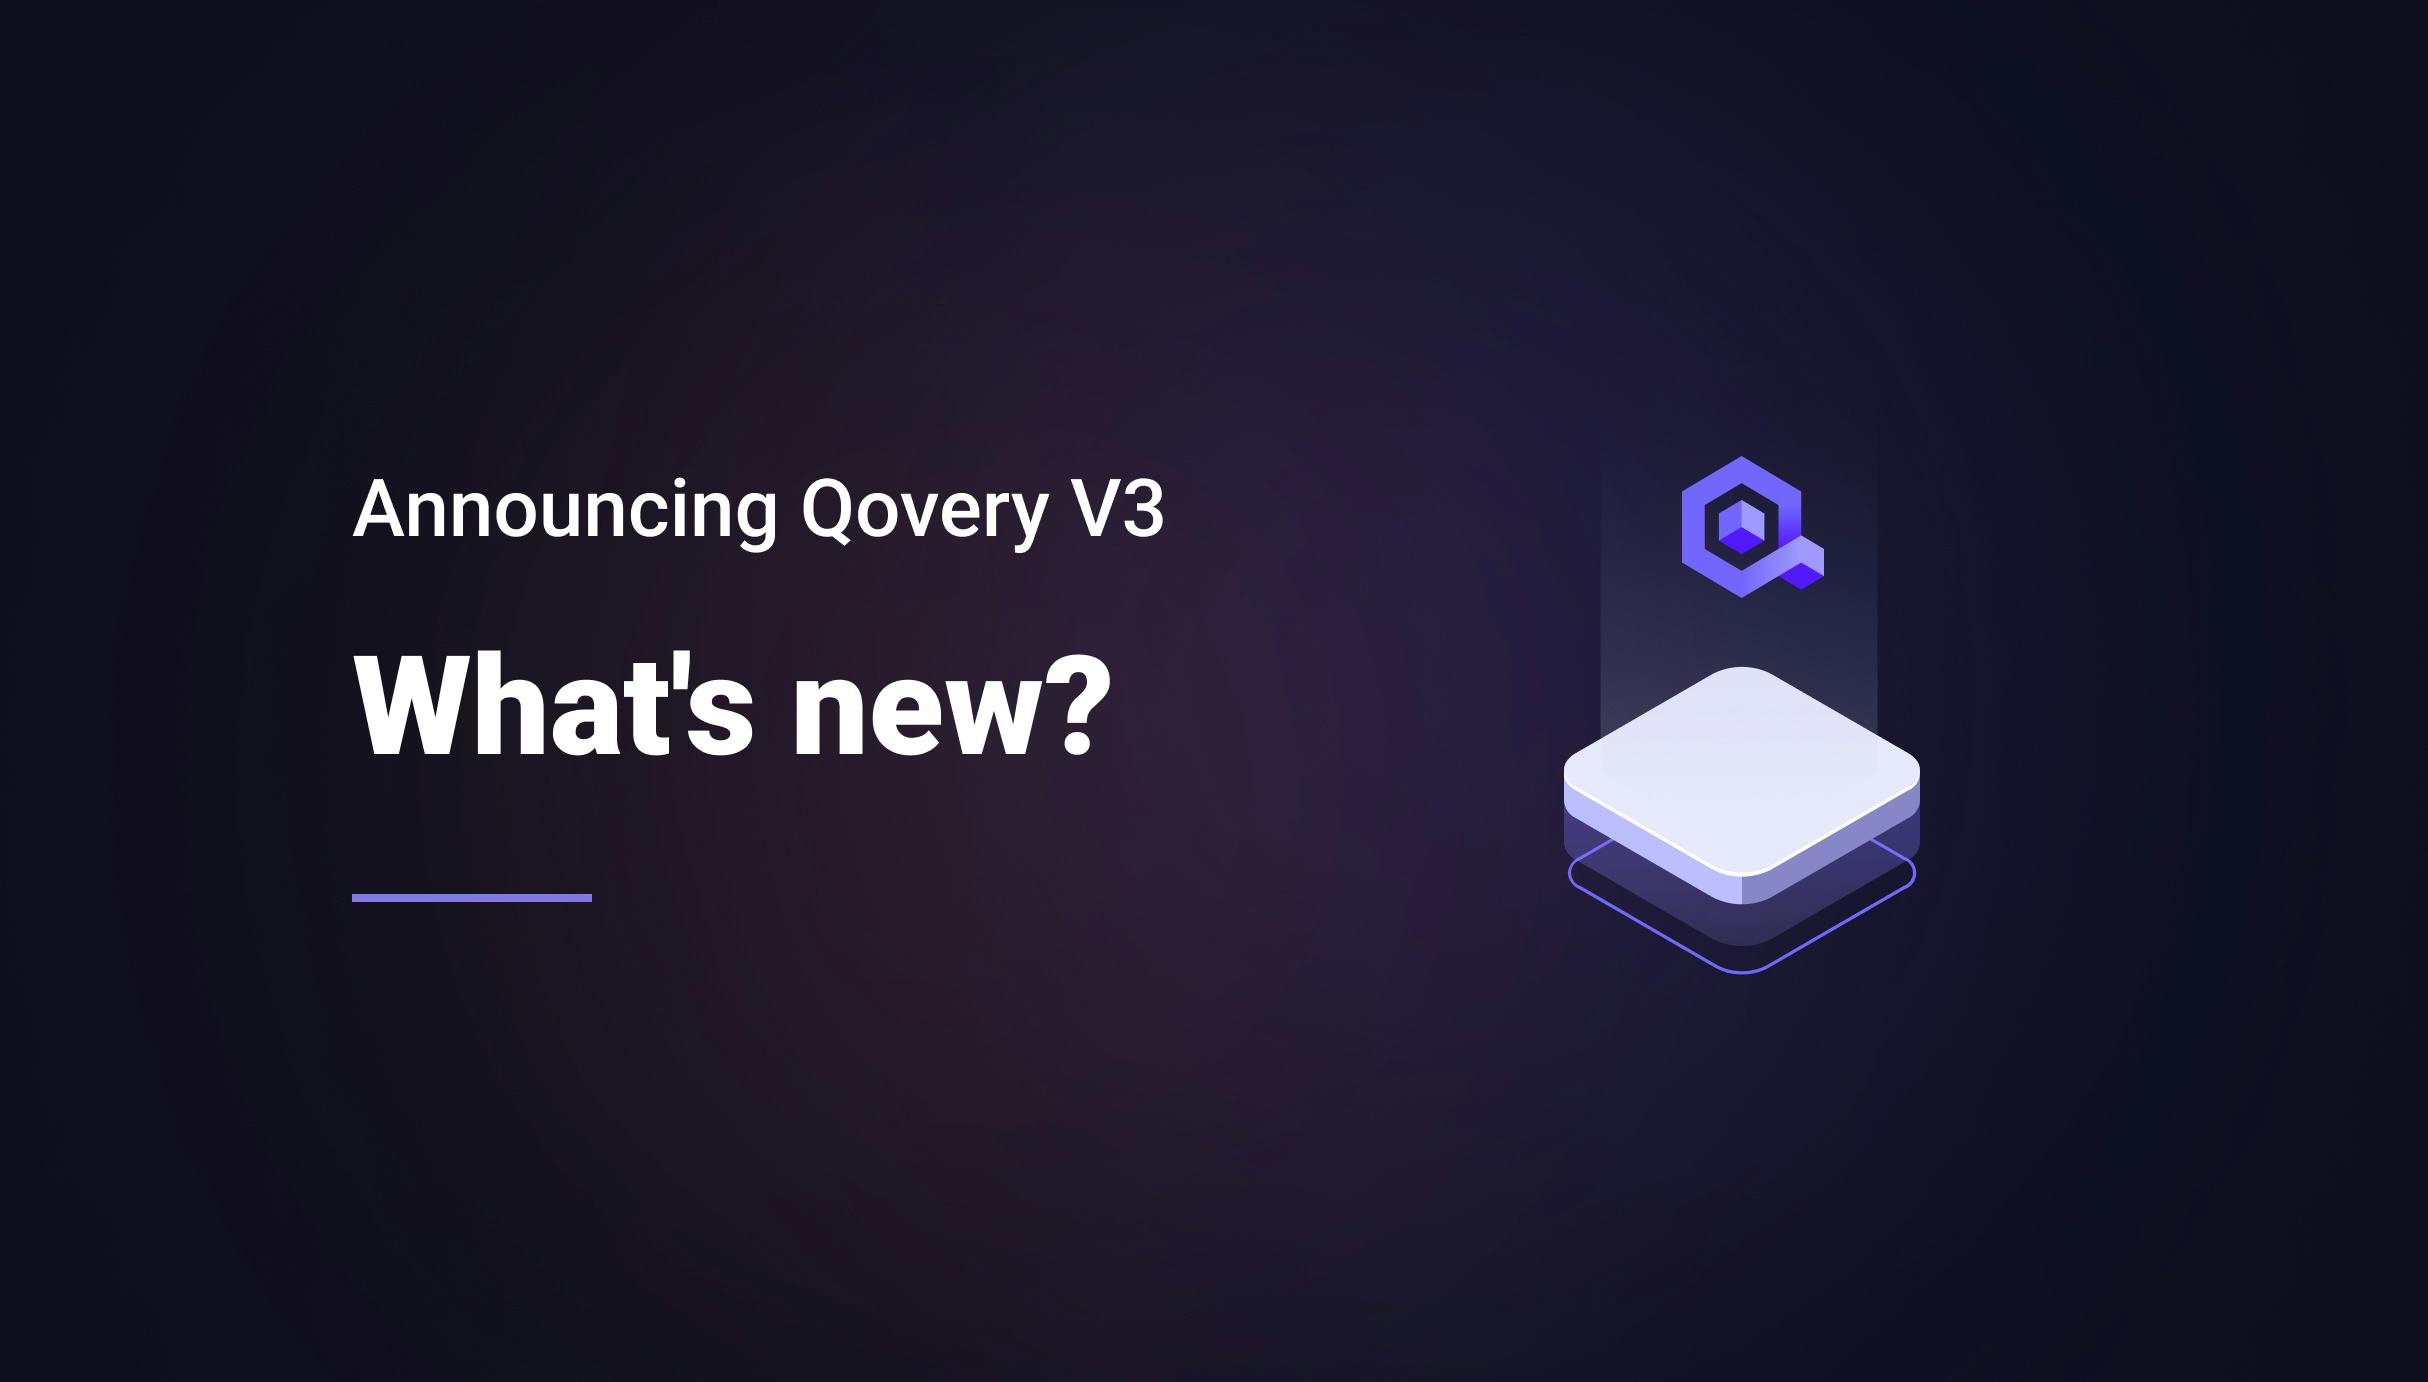 Announcing Qovery V3: What's new? - Qovery